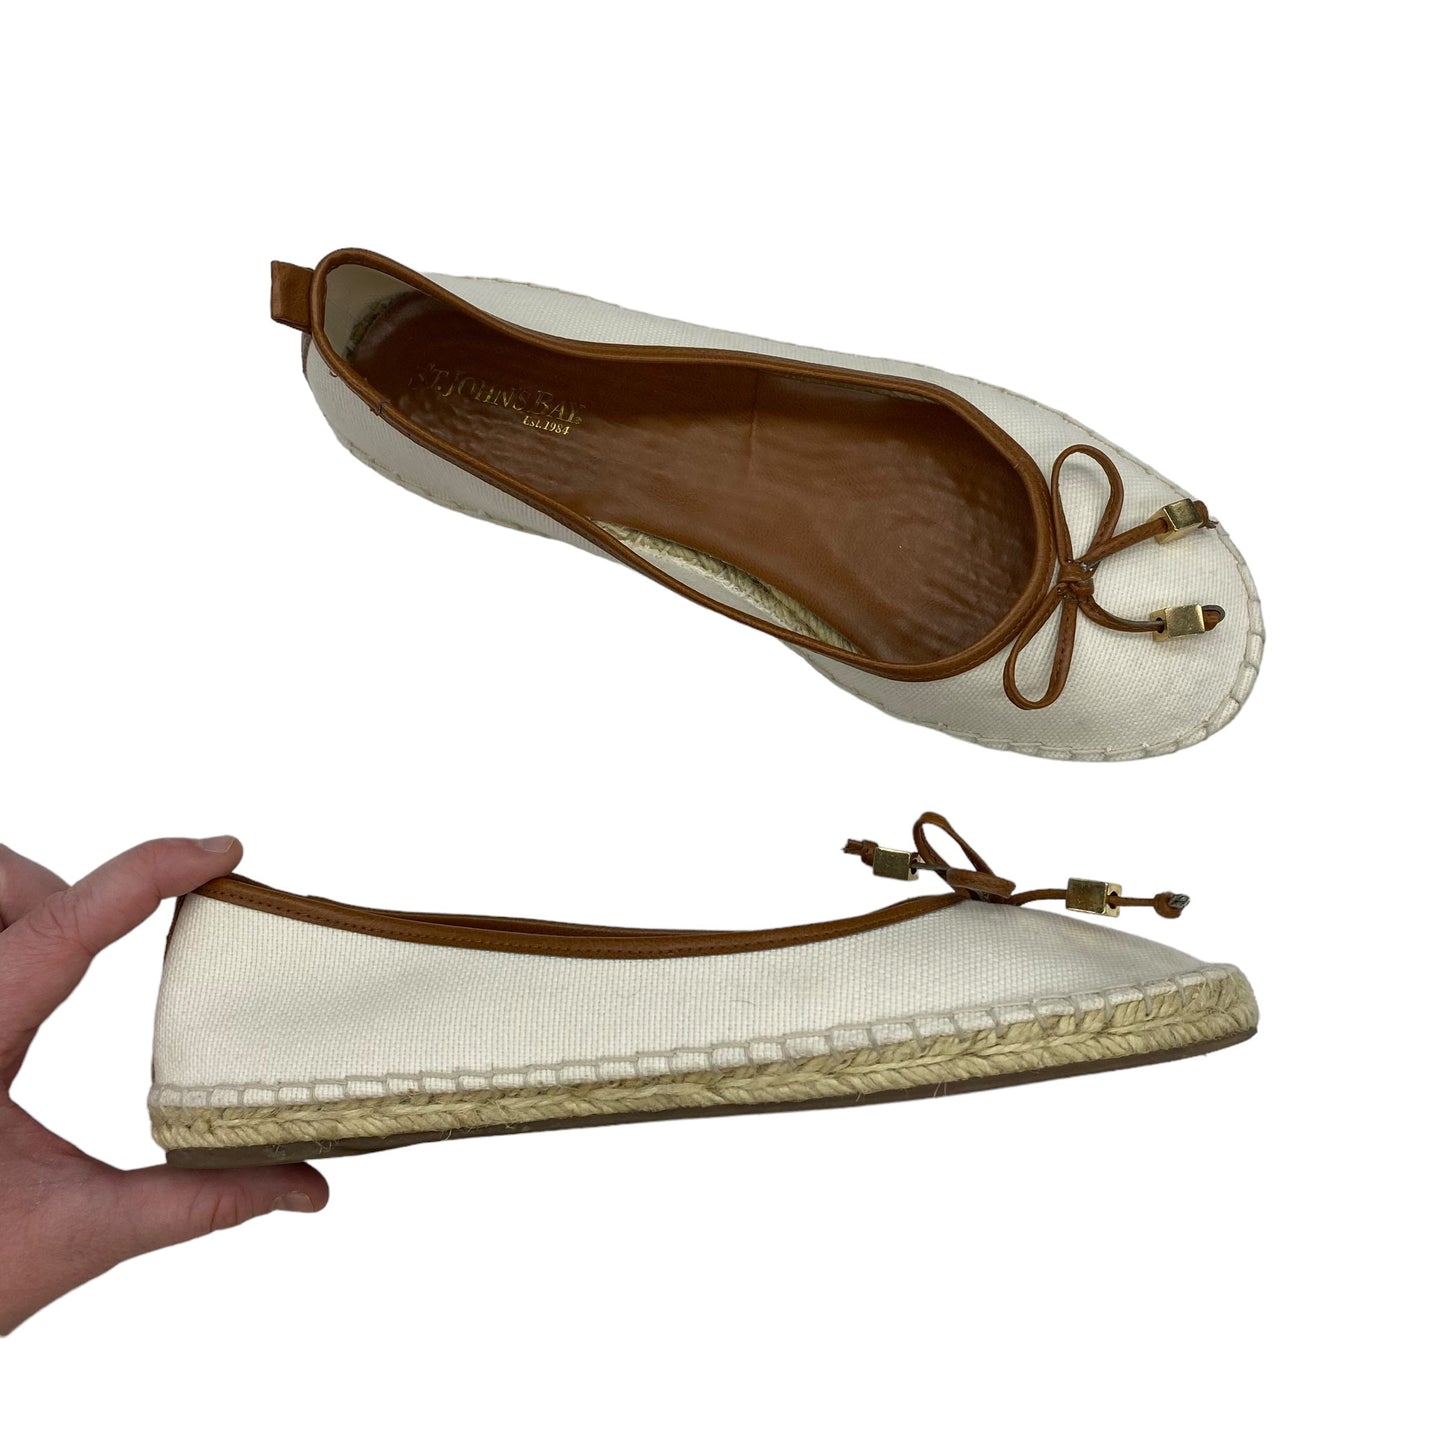 CREAM SHOES FLATS by ST JOHNS BAY Size:8